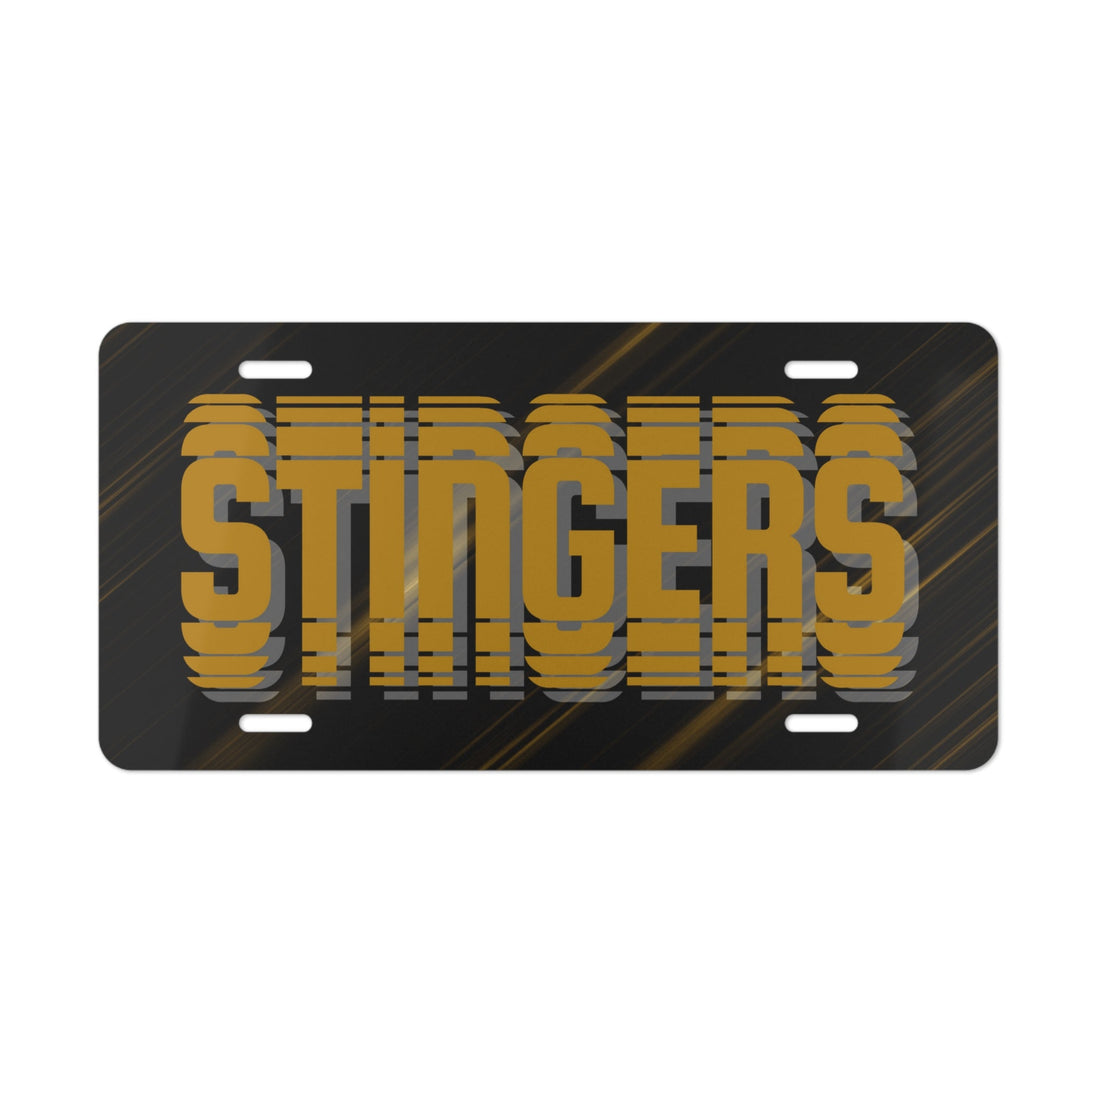 Stingers Vanity Plate - Accessories - Positively Sassy - Stingers Vanity Plate